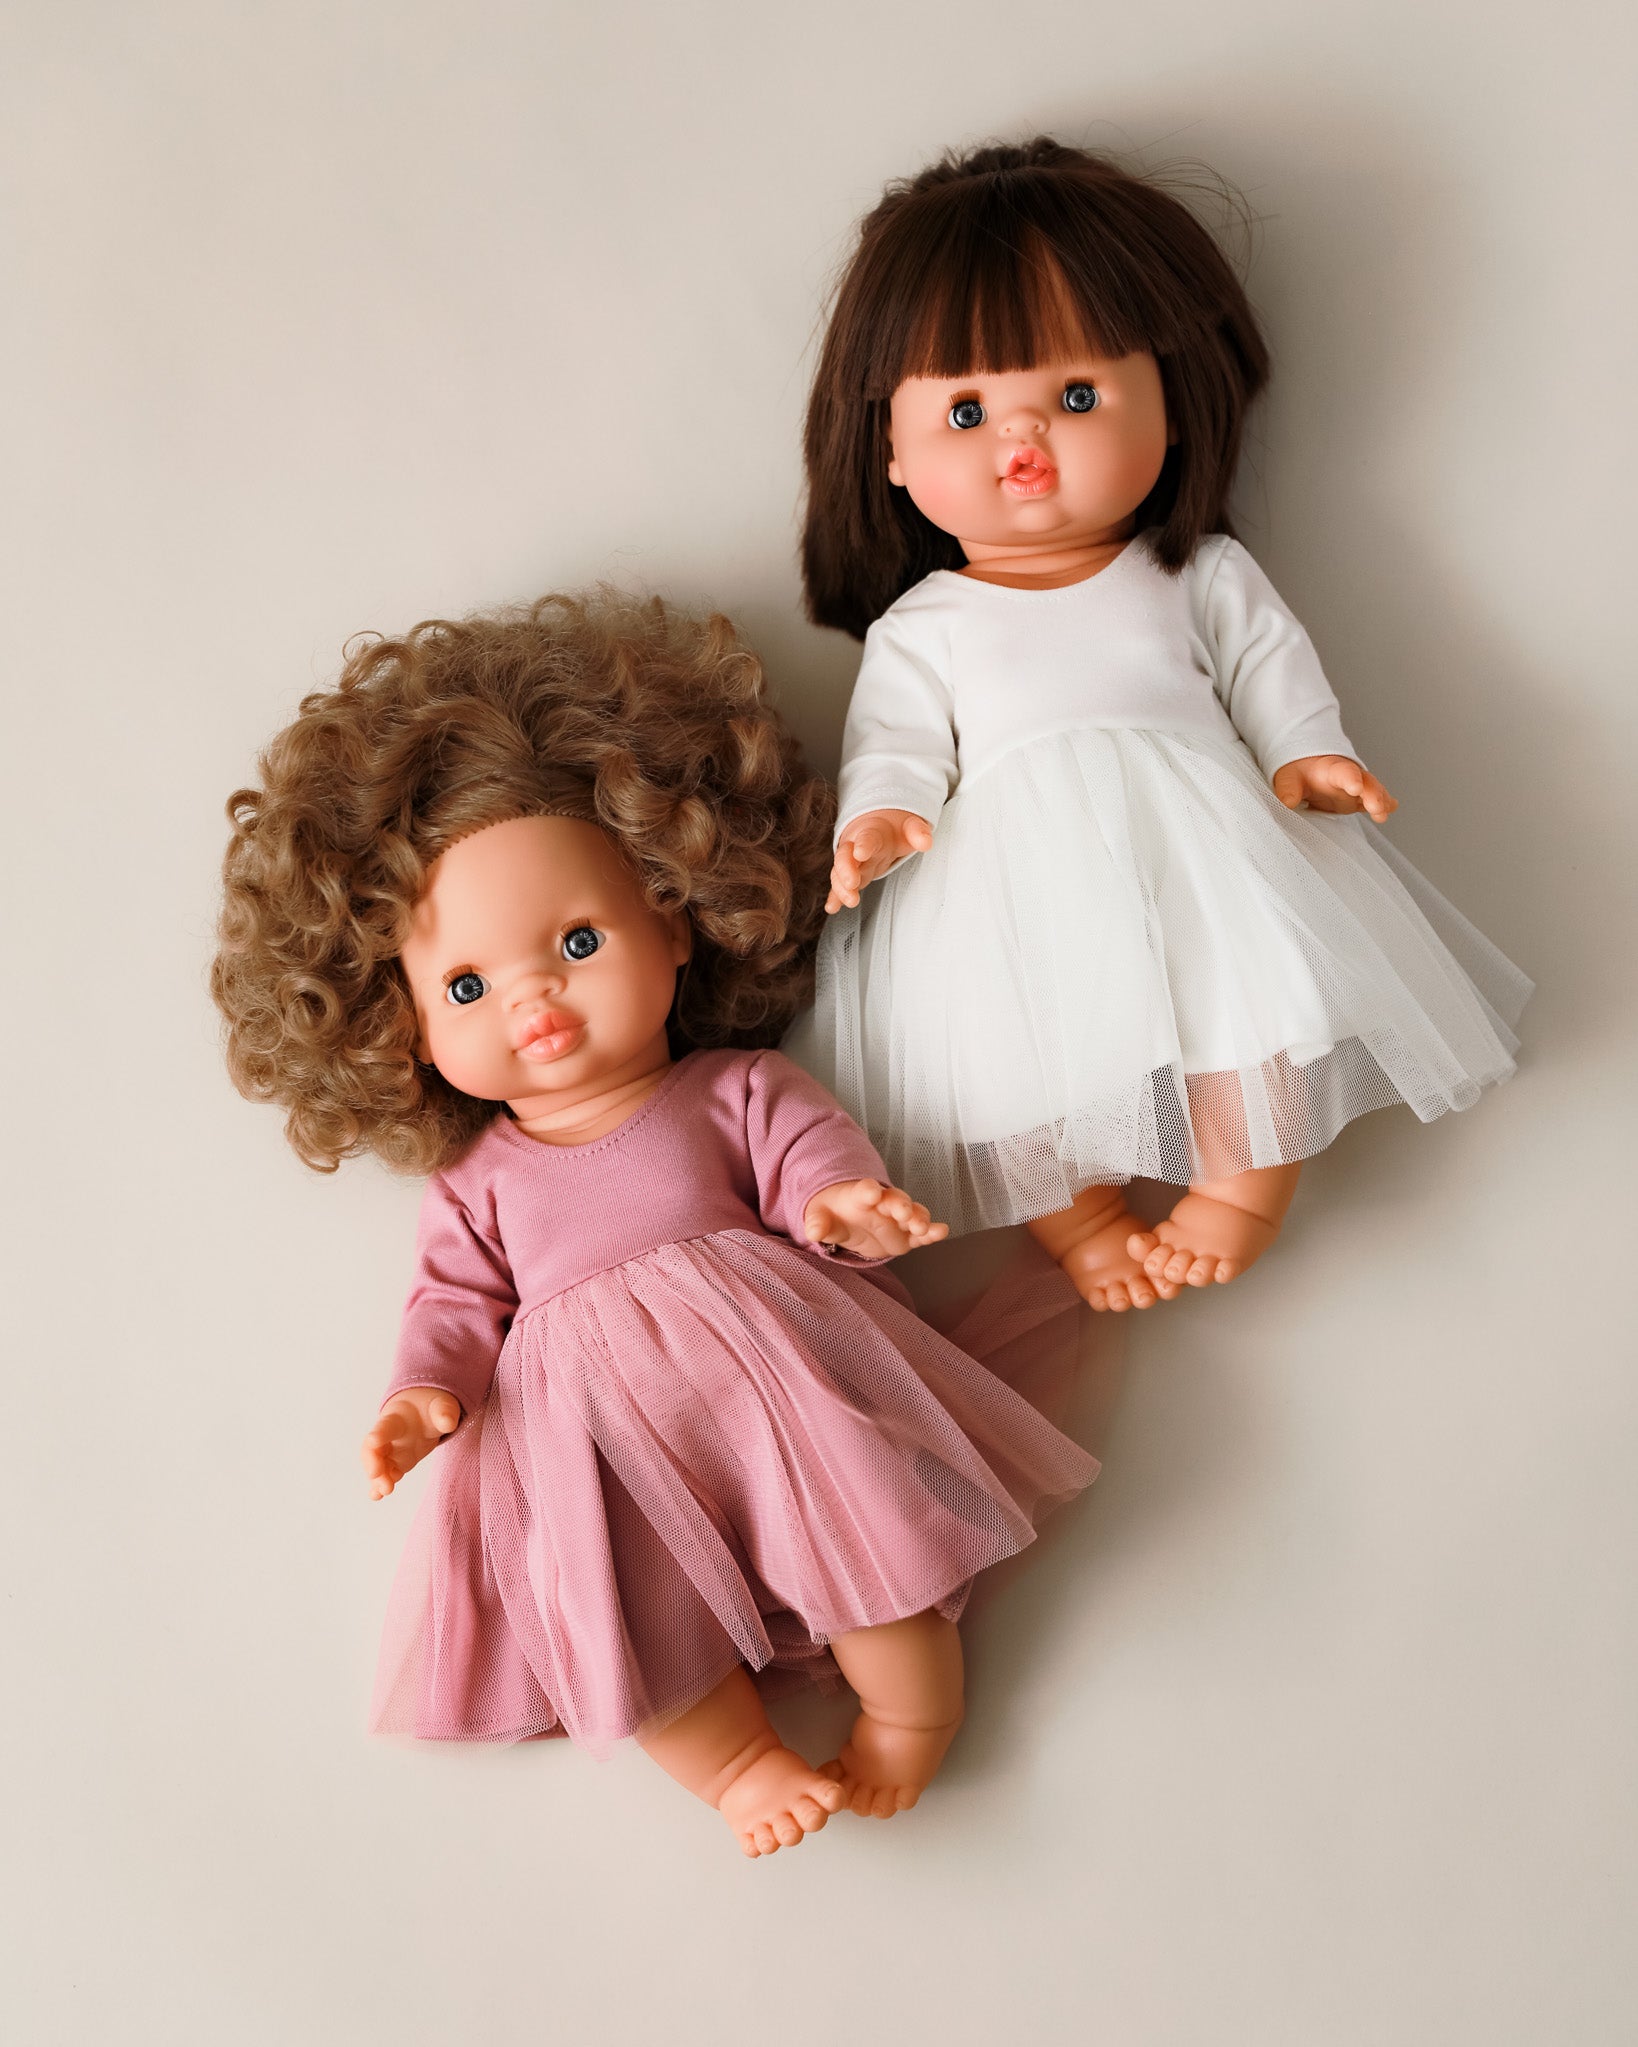 Doll clothes, Minikane doll clothes, clothes for dolls